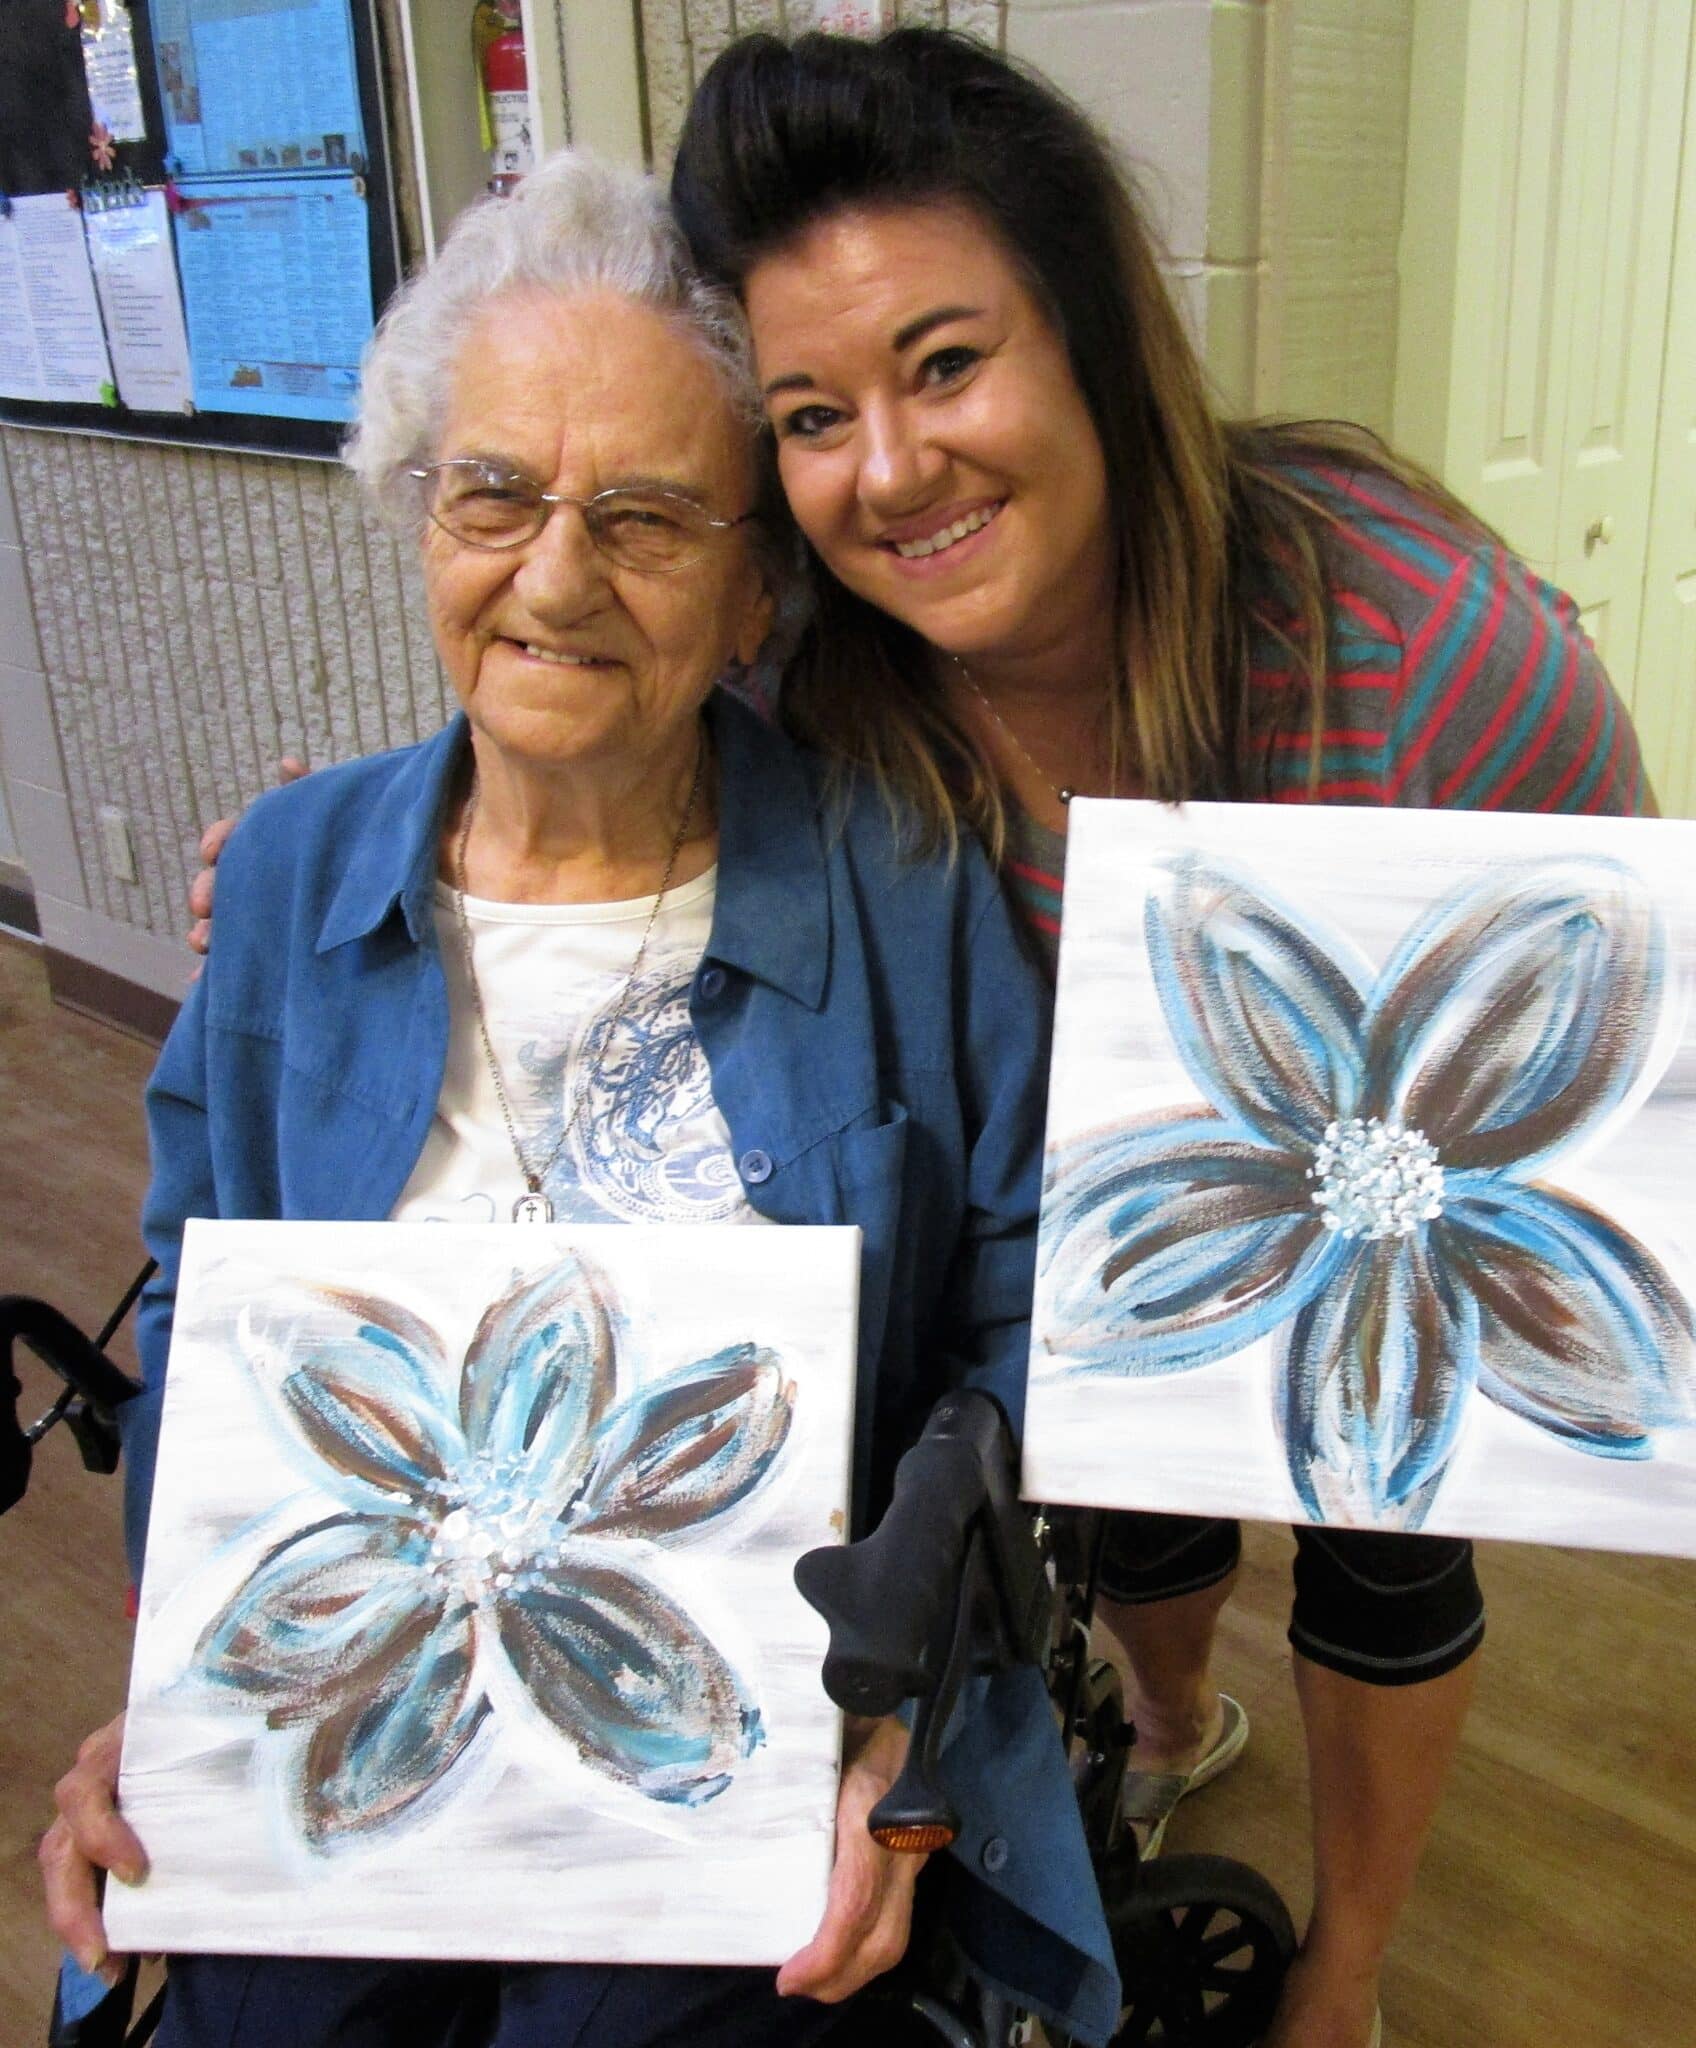 A photo of a senior woman and a younger woman displaying their artwork at Kensington Evergreen.